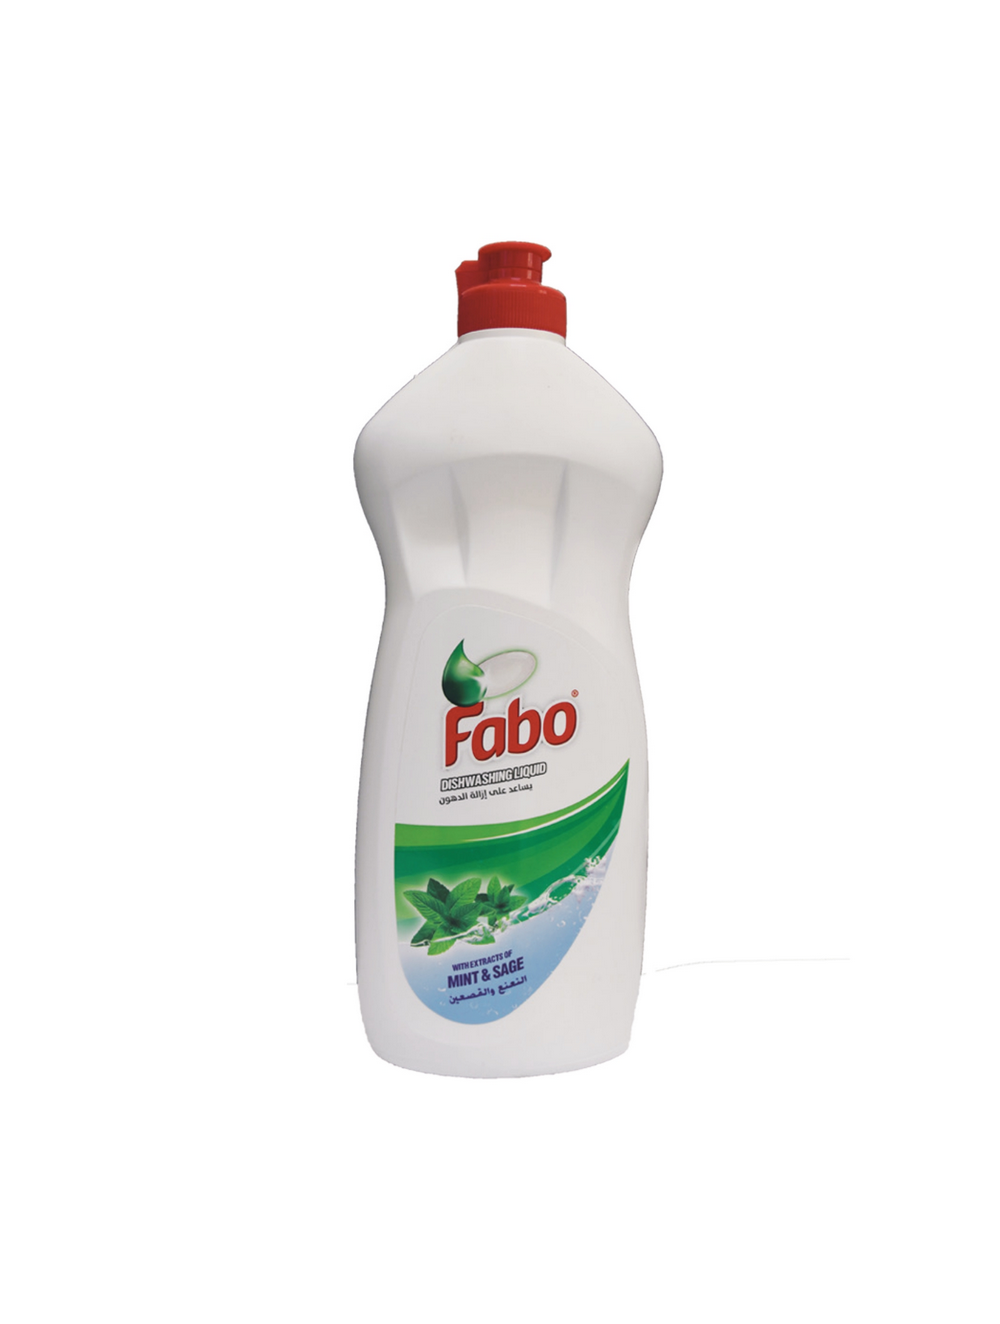 fabo-products_page-0014